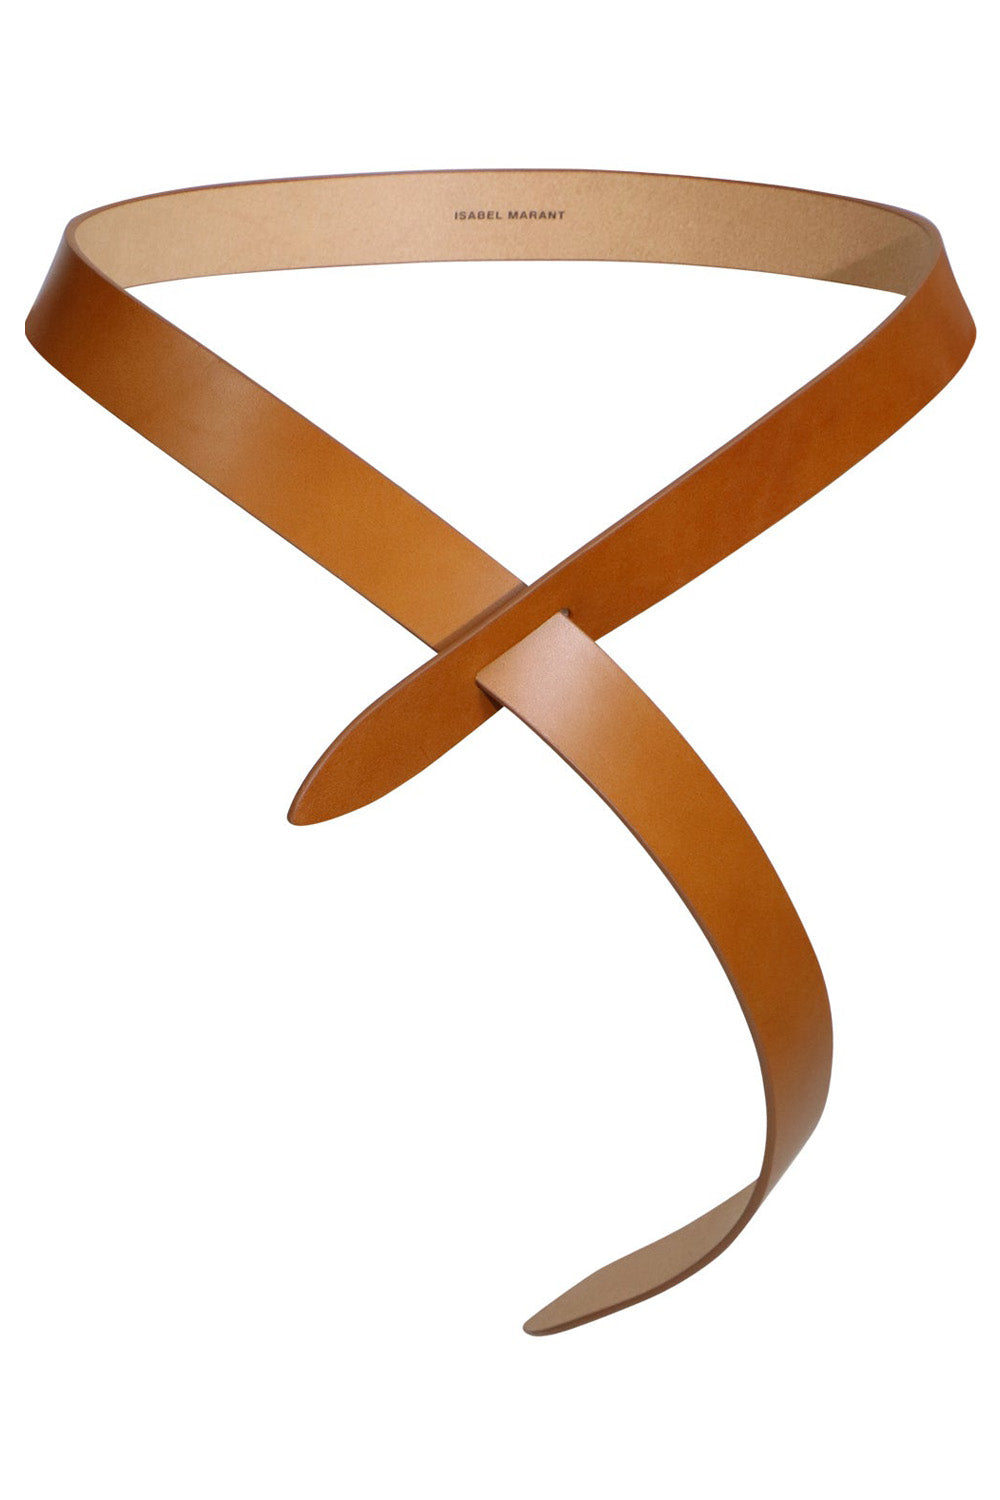 ISABEL MARANT ACCESSORIES LECCE LEATHER TIE UP BELT | NATURAL